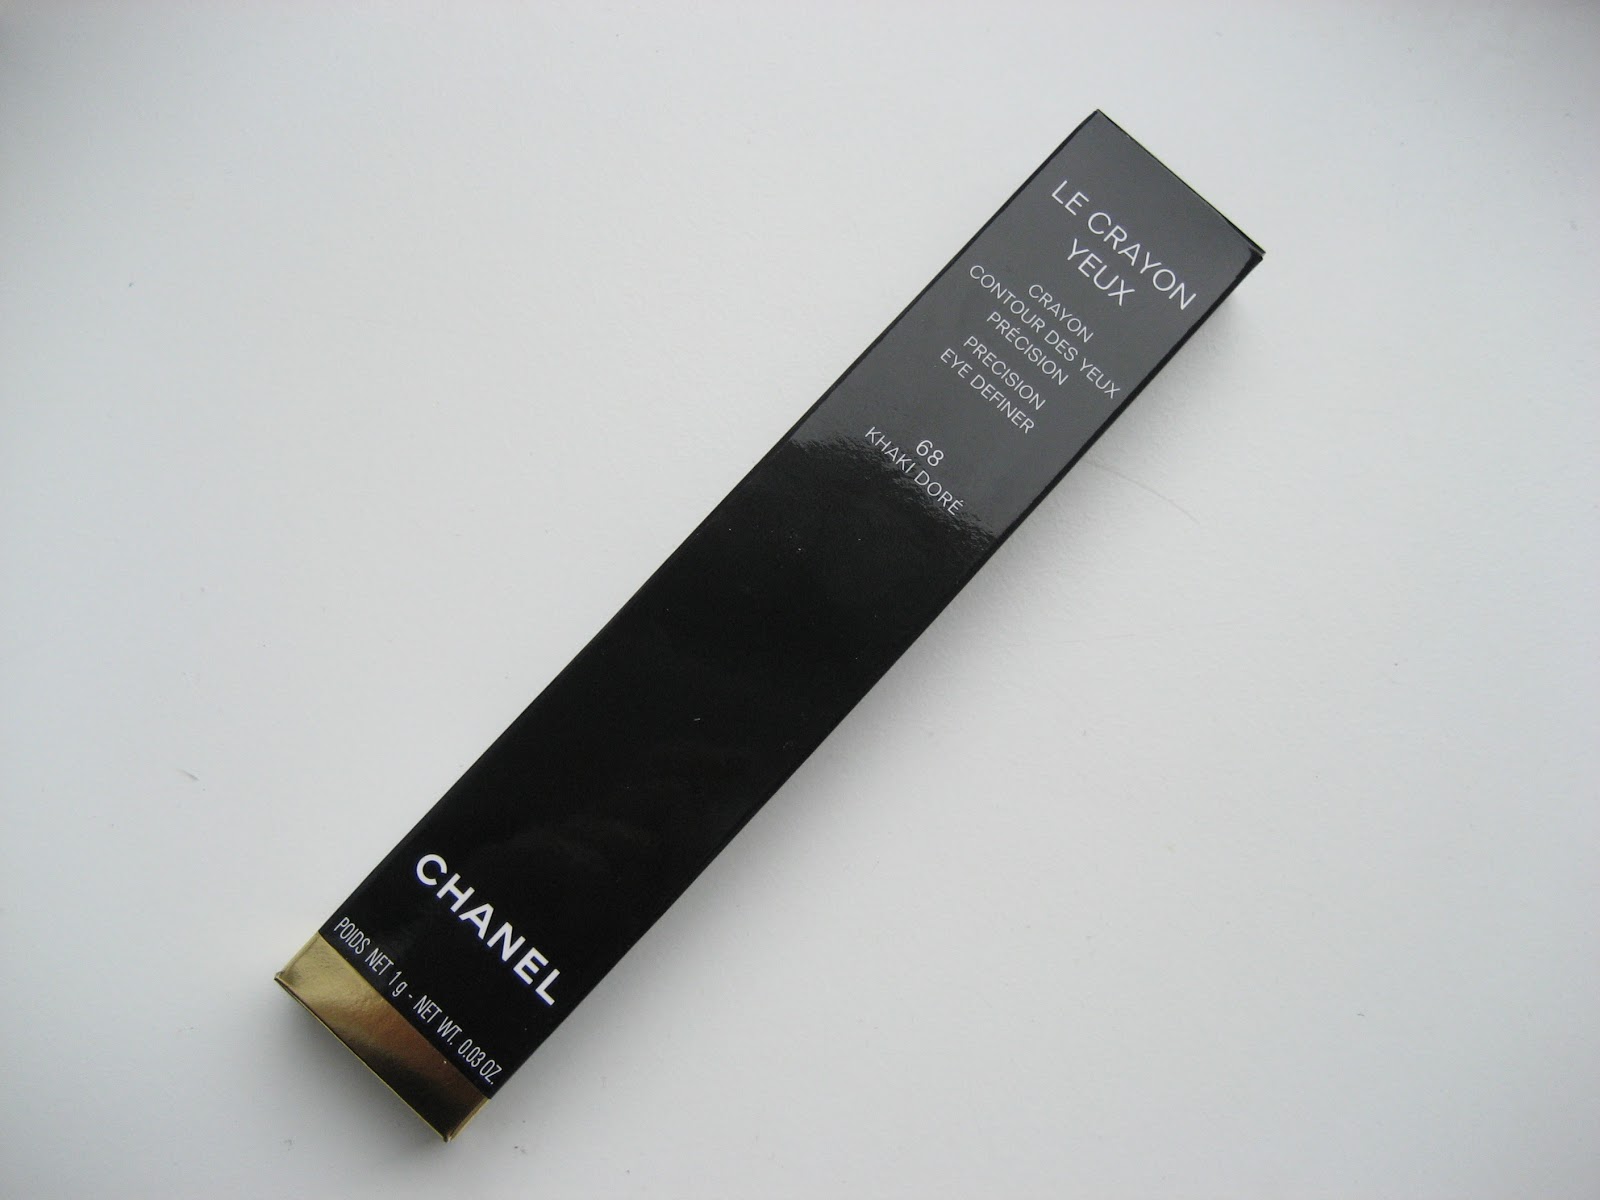 Chanel Ebene, Cassis, Brun Agape Stylo Yeux Eyeliners Reviews & Swatches